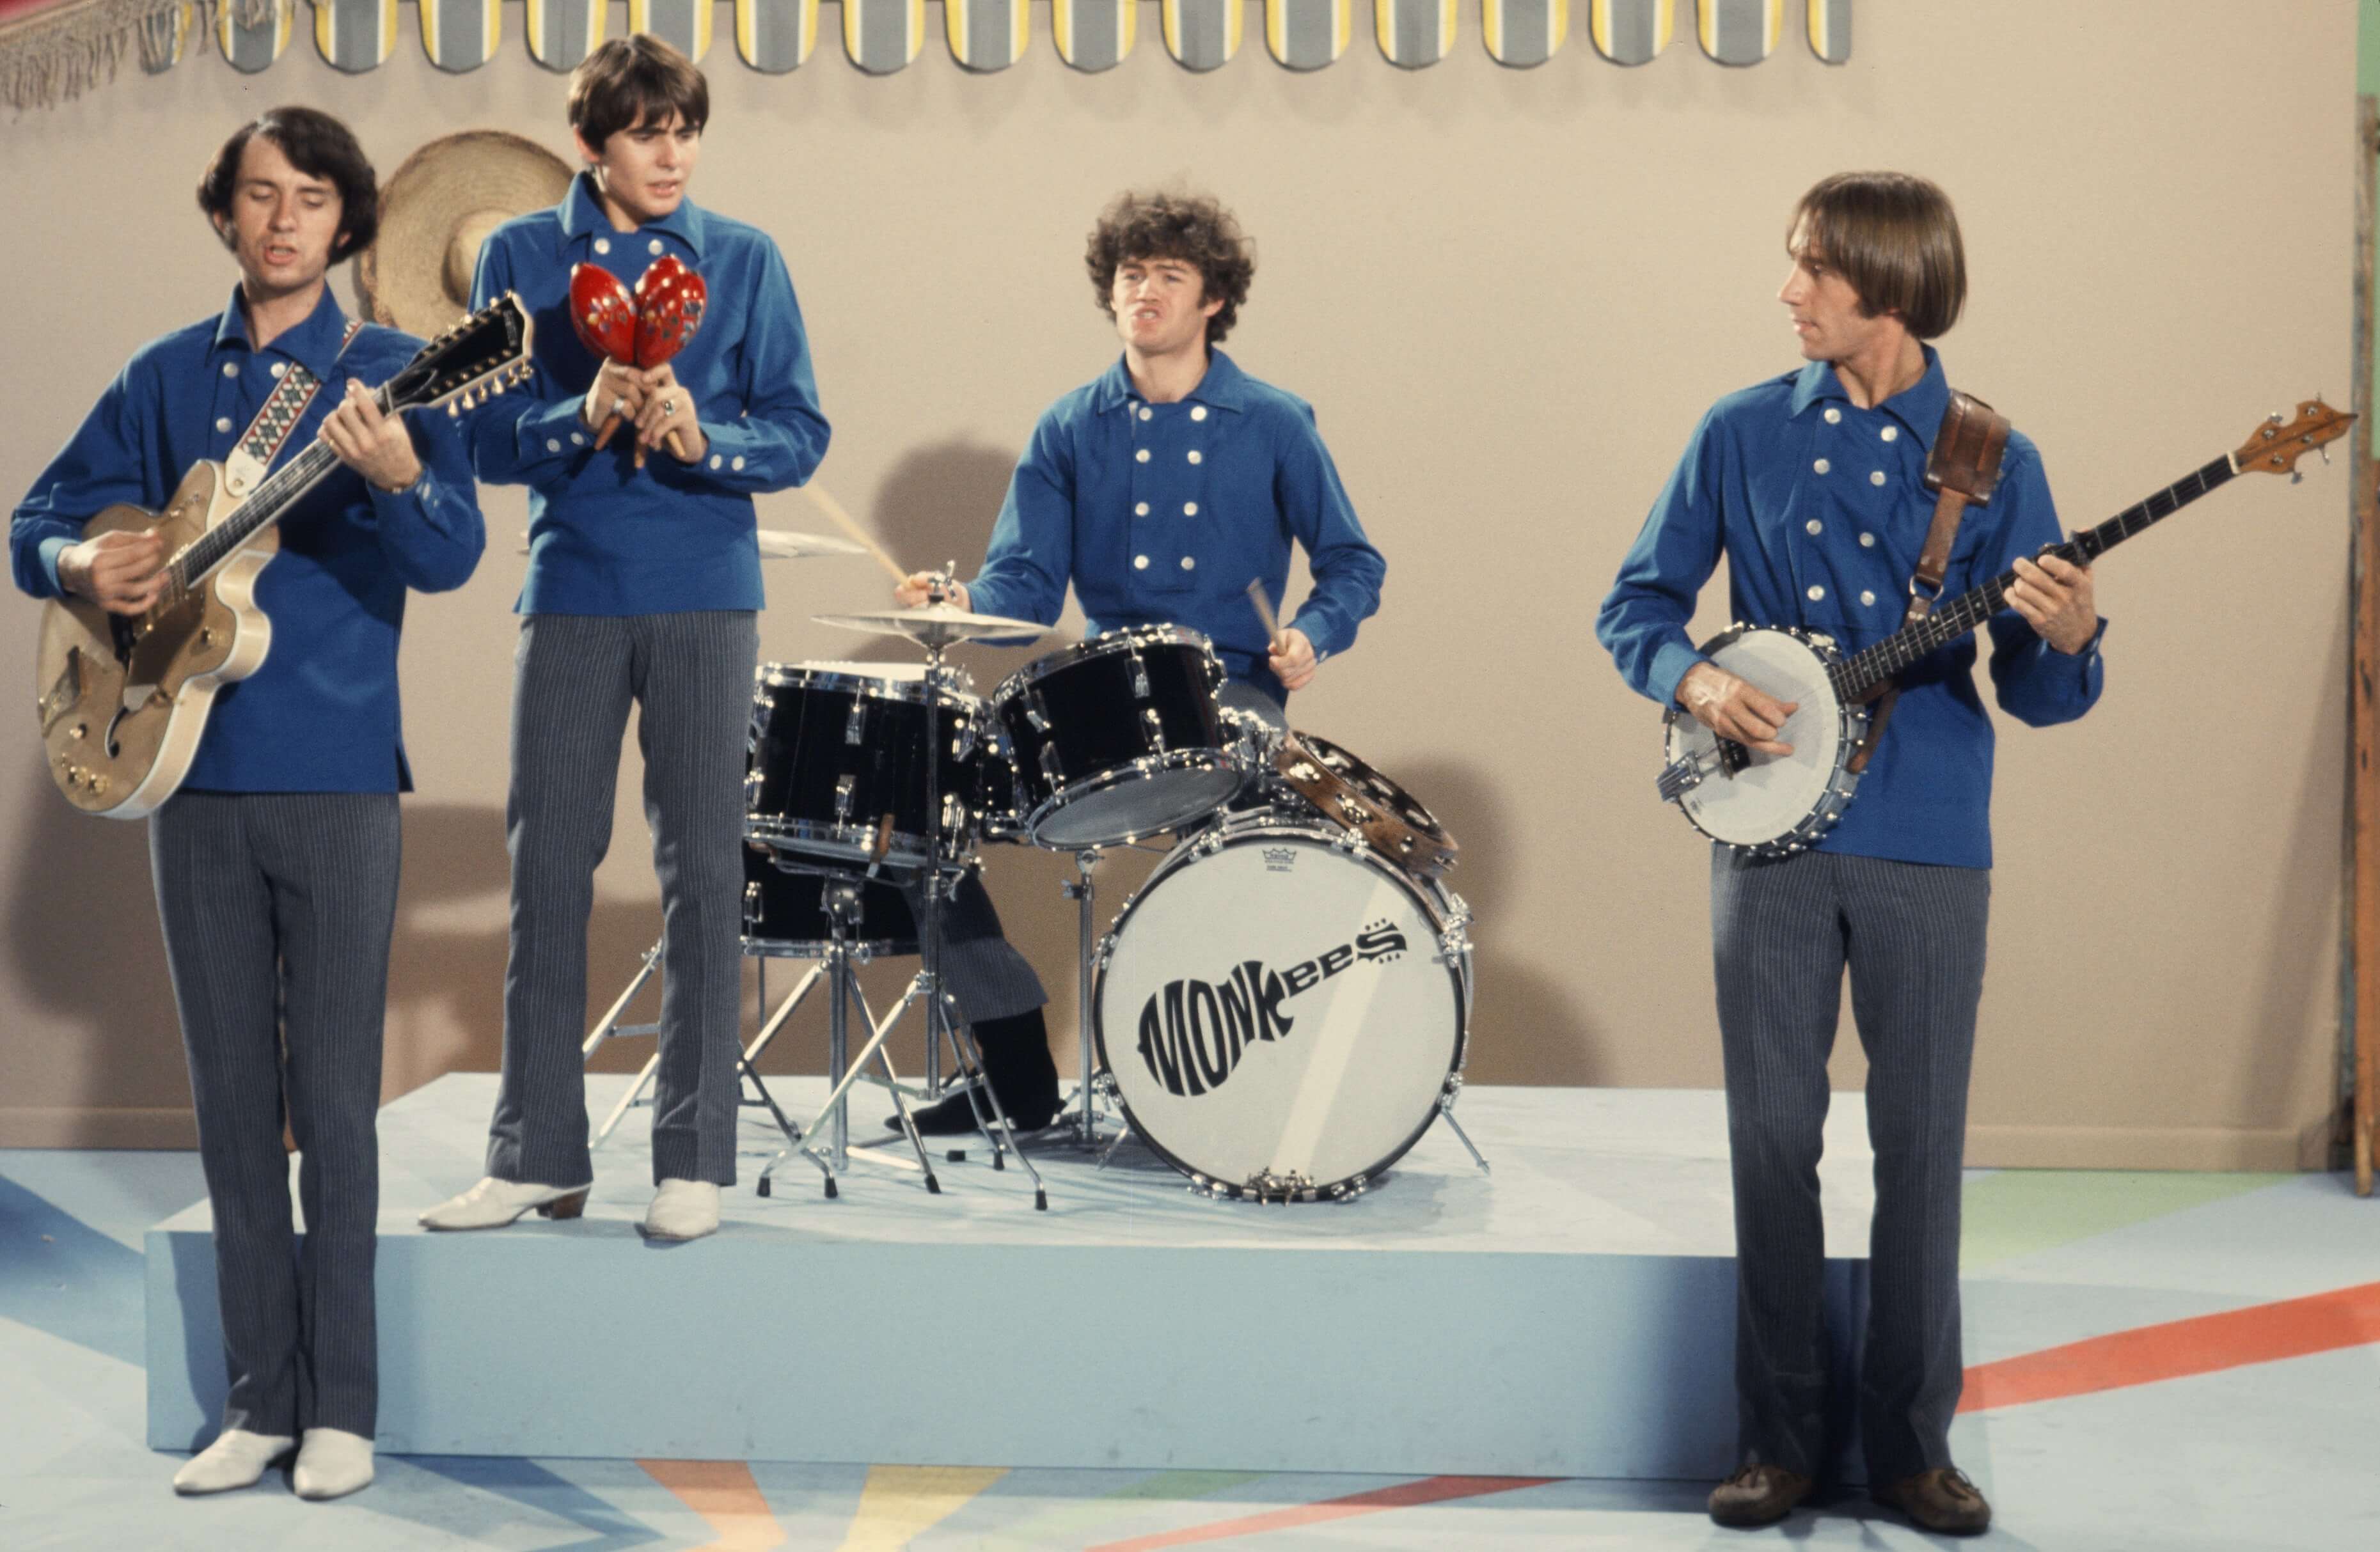 The Monkees in blue during the "Last Train to Clarksville" era